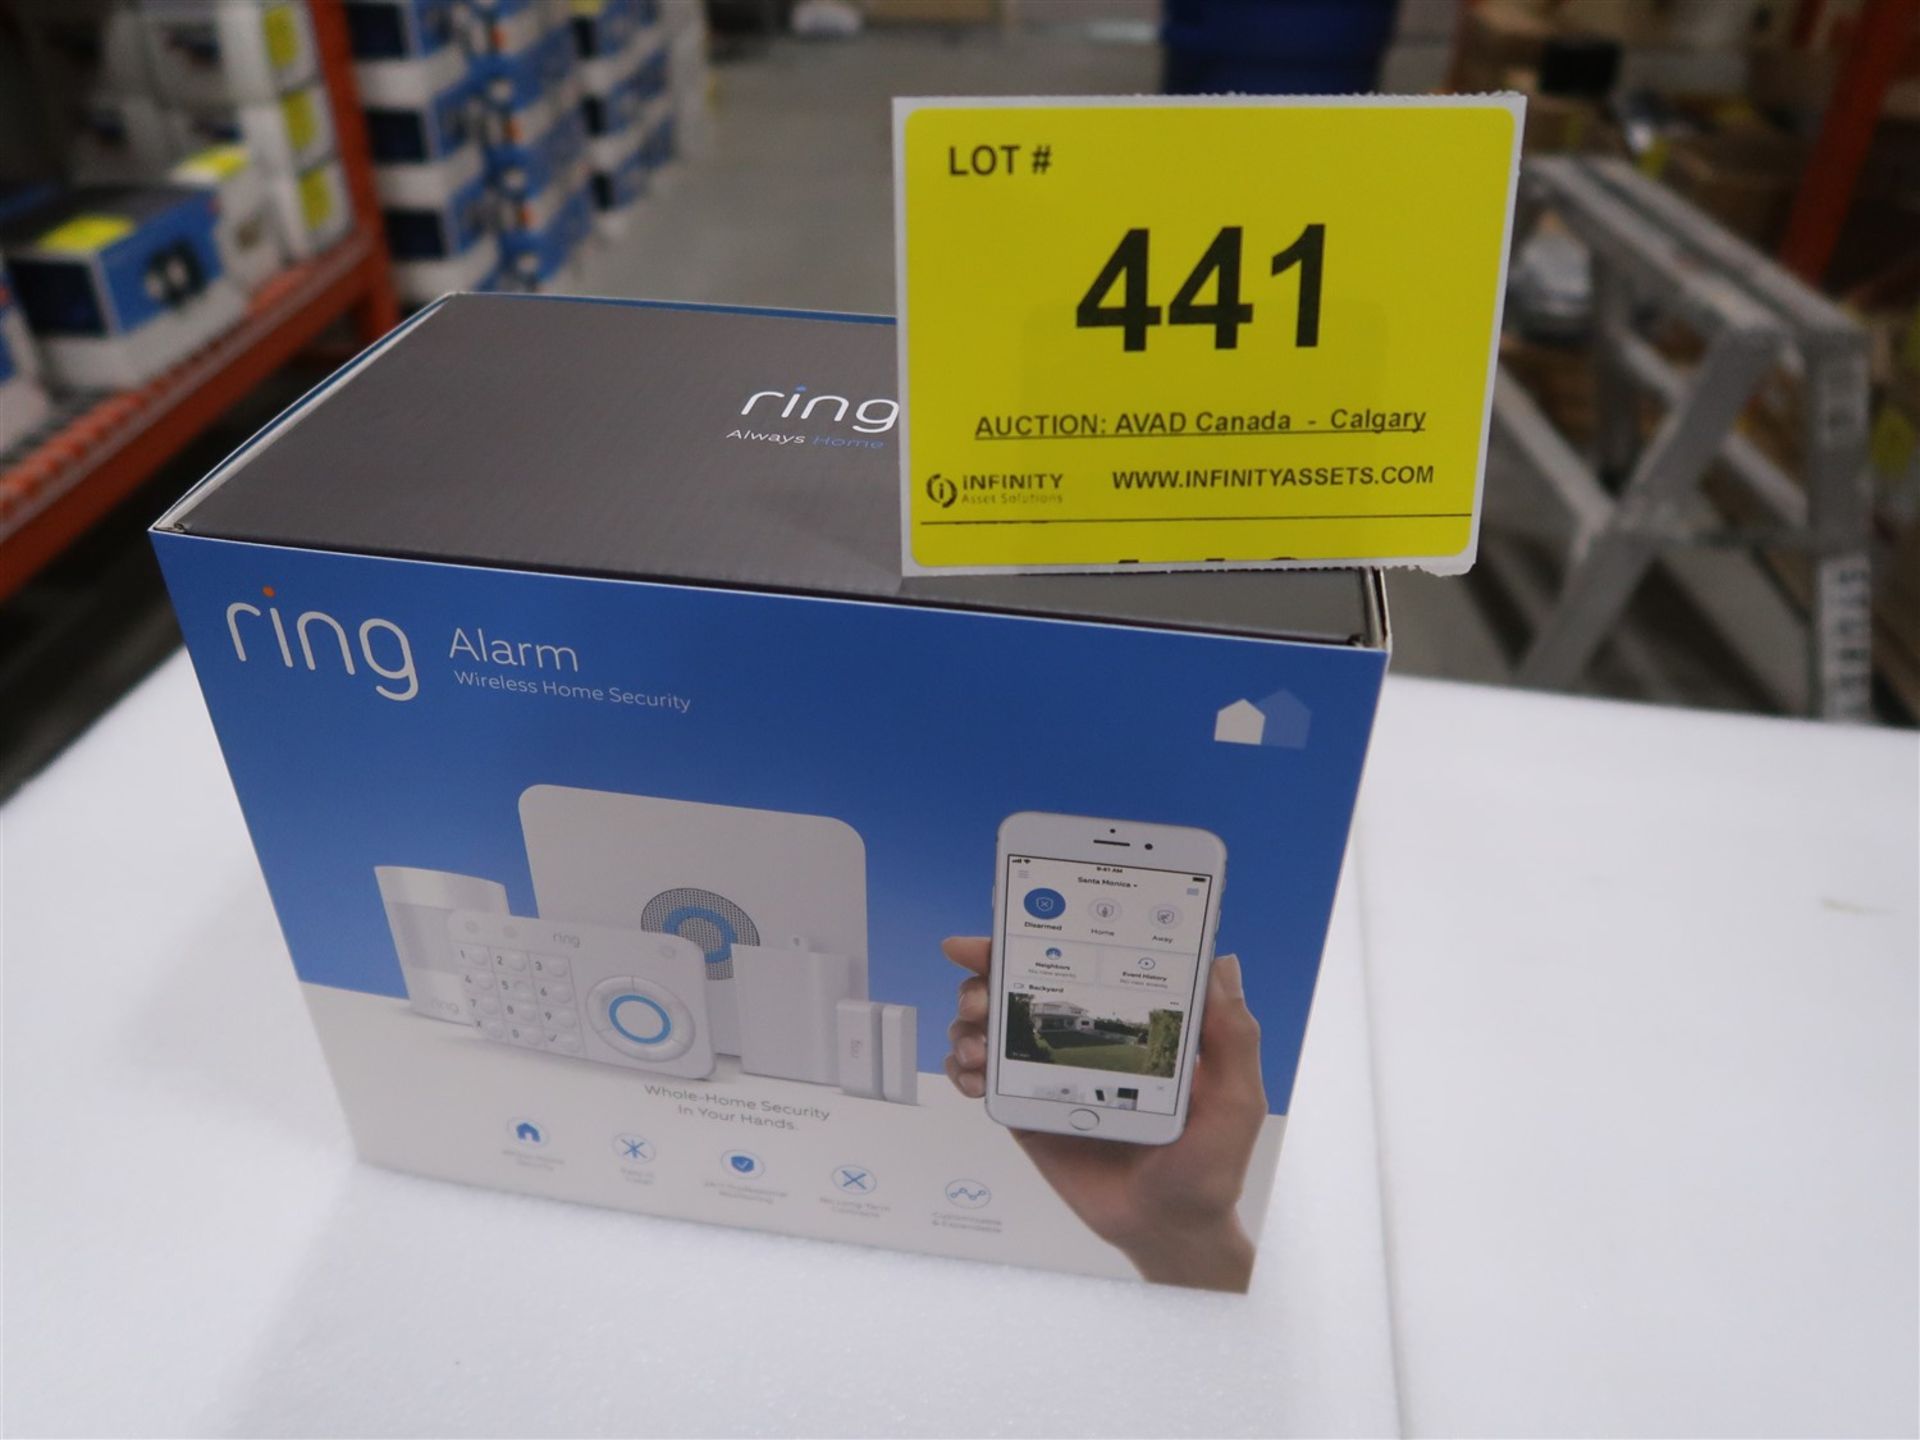 RING ALARM WIRELESS HOME SECURITY SYSTEM